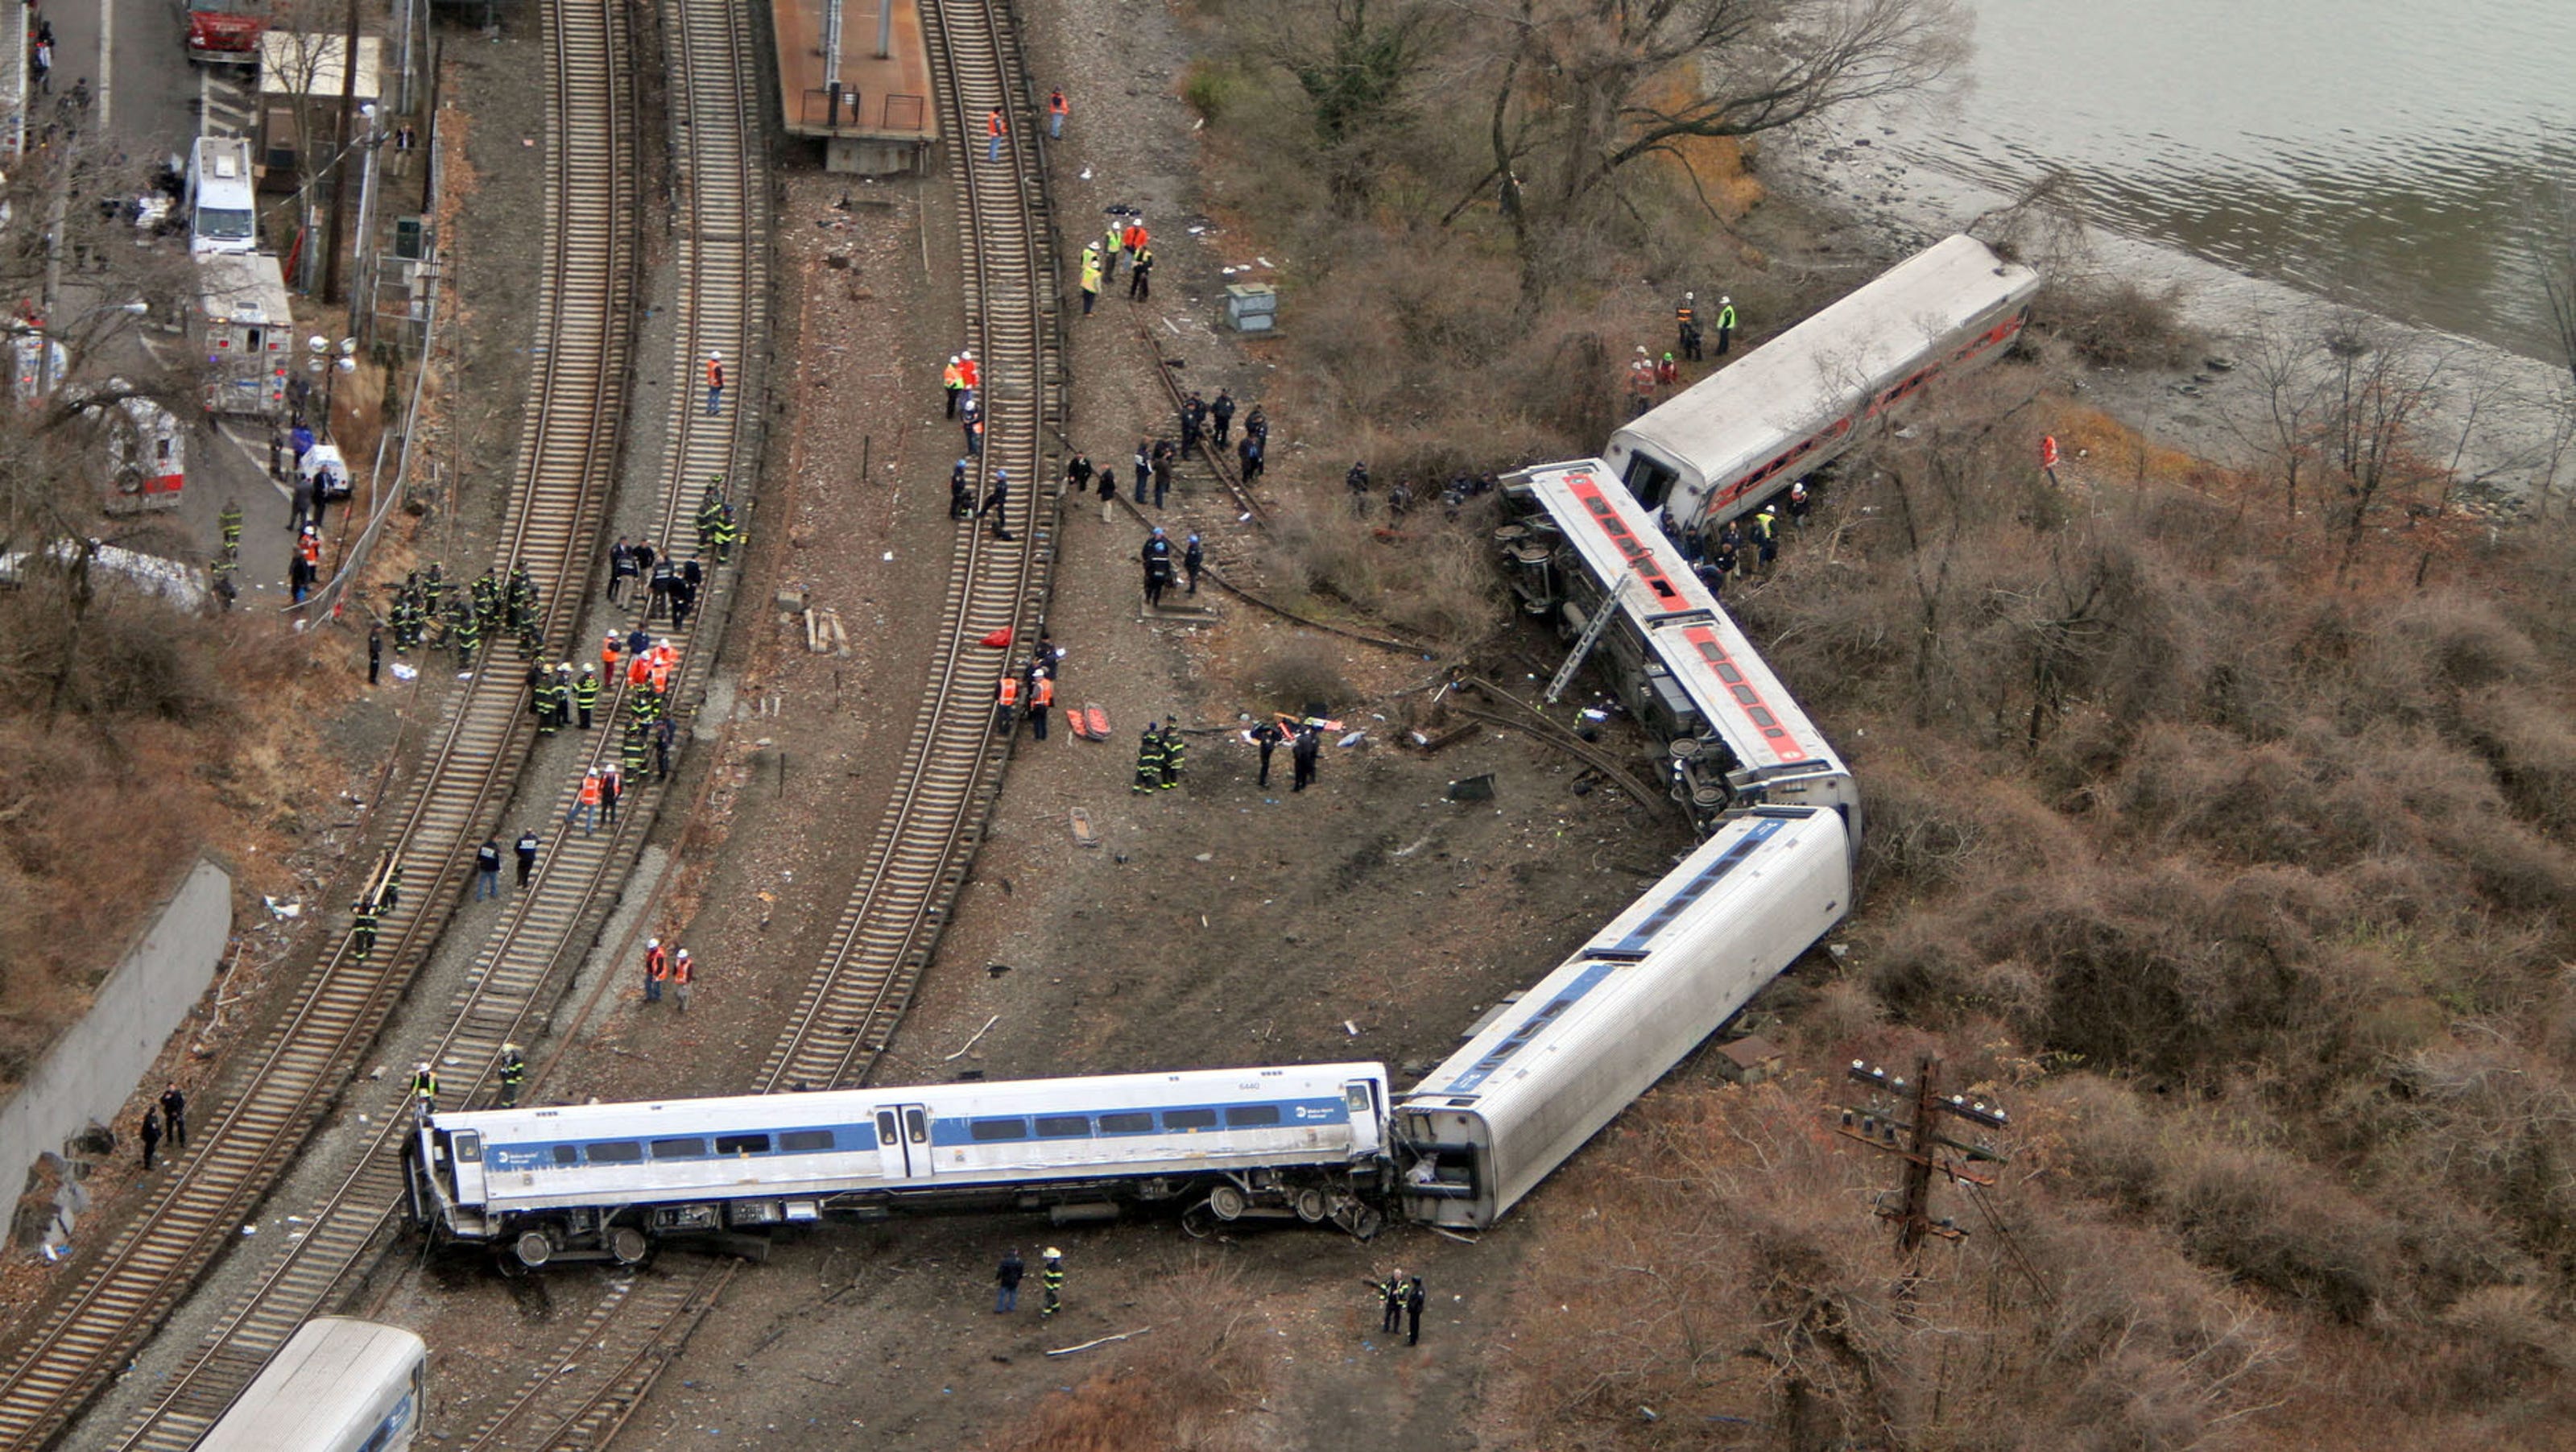 Ntsb Train Was Going 82 Mph Into Curve Before Crash 